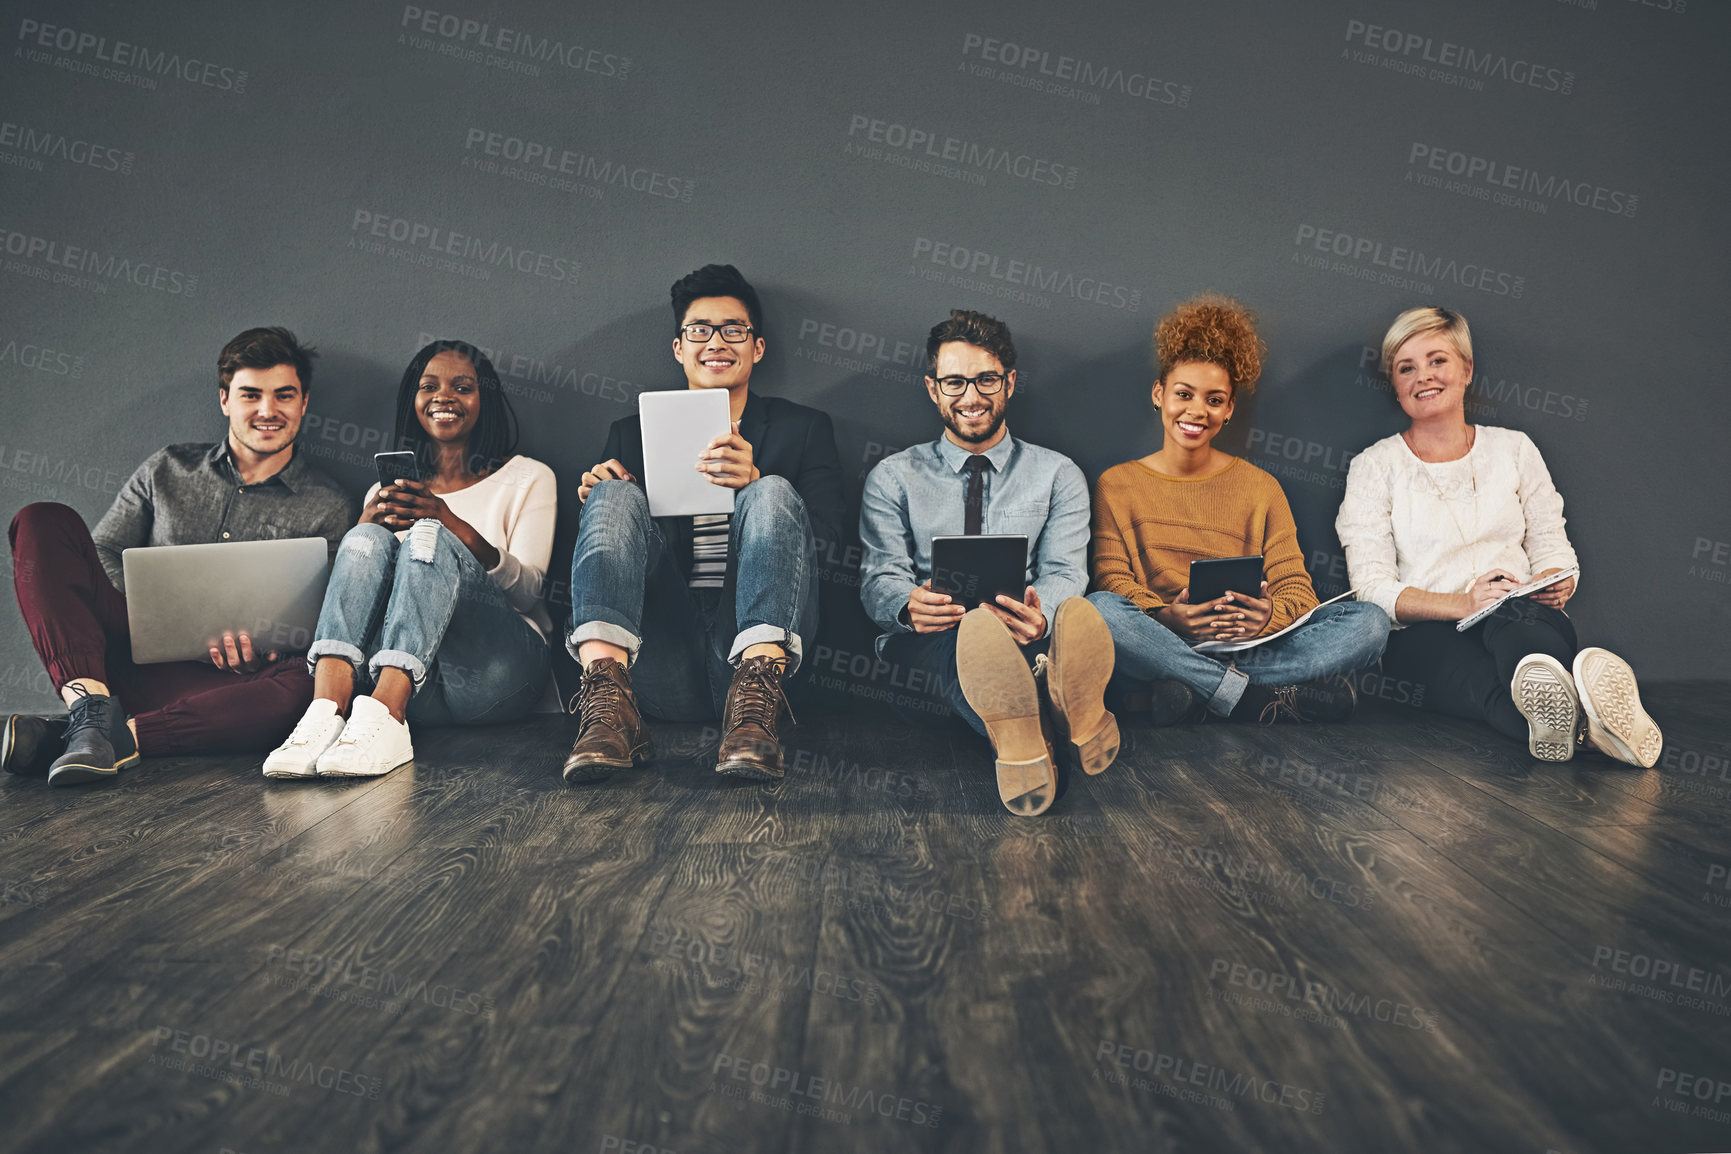 Buy stock photo Studio shot of a diverse group of creative employees social networking against a grey background